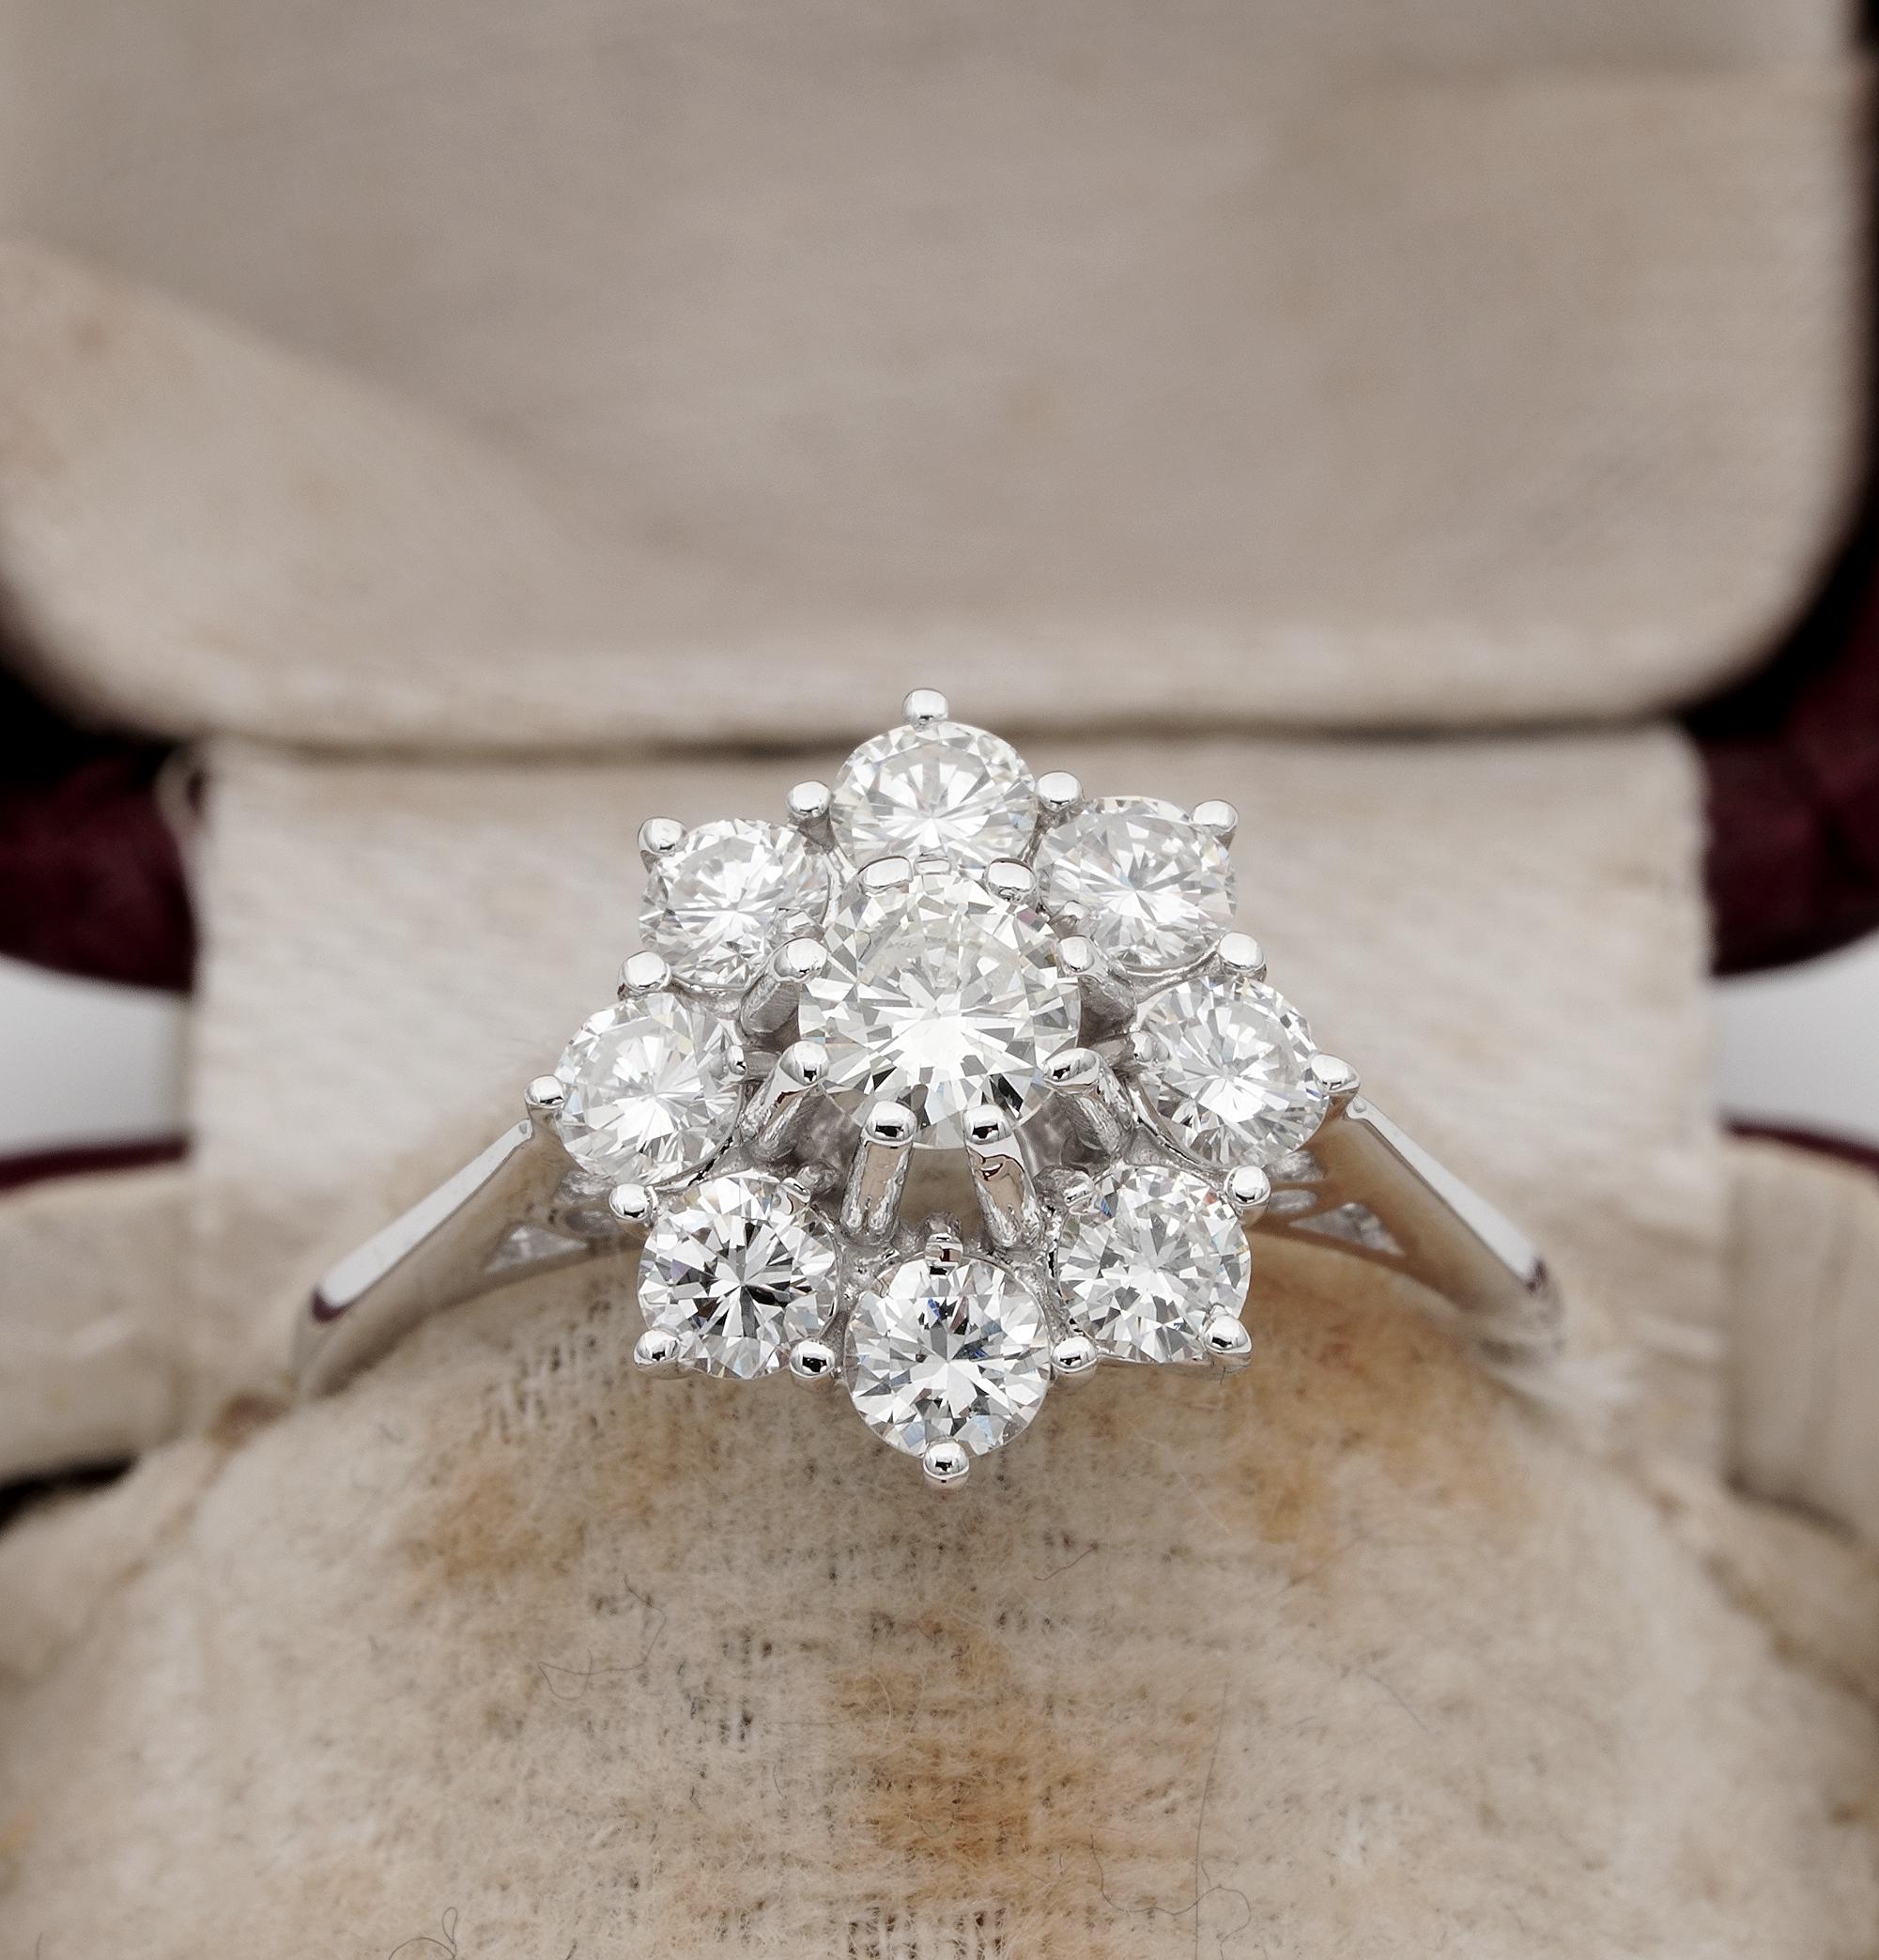 Superb Retro ring
Hand crafted mount accurately made of solid 18 KT white gold, 1945 ca –
Daisy shape with gorgeous under-gallery work, overwhelmed by a selection of 9 bright white  brilliant cut Diamonds of top quality
Diamonds are  1.45 Ct. G VVS